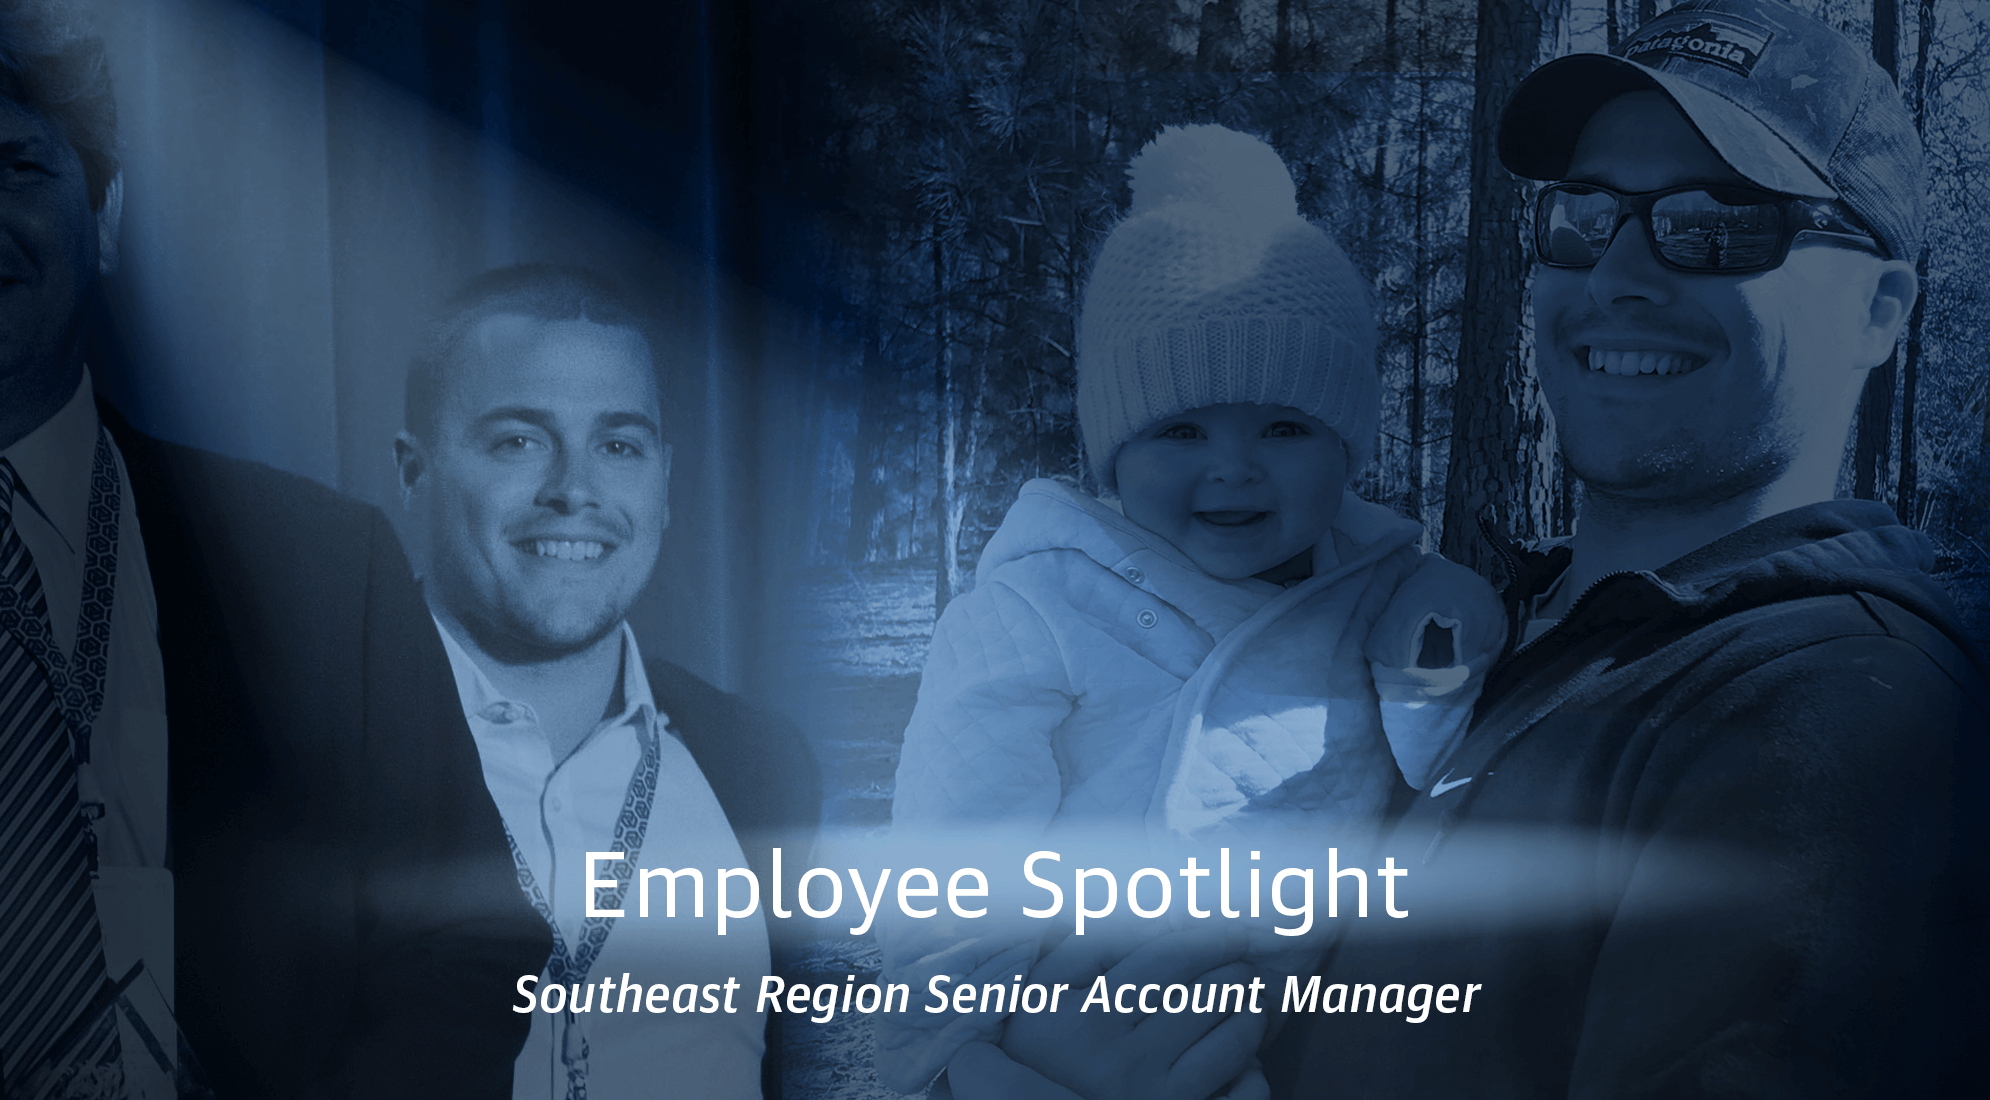 Employee Spotlight: From Intern to Senior Account Manager